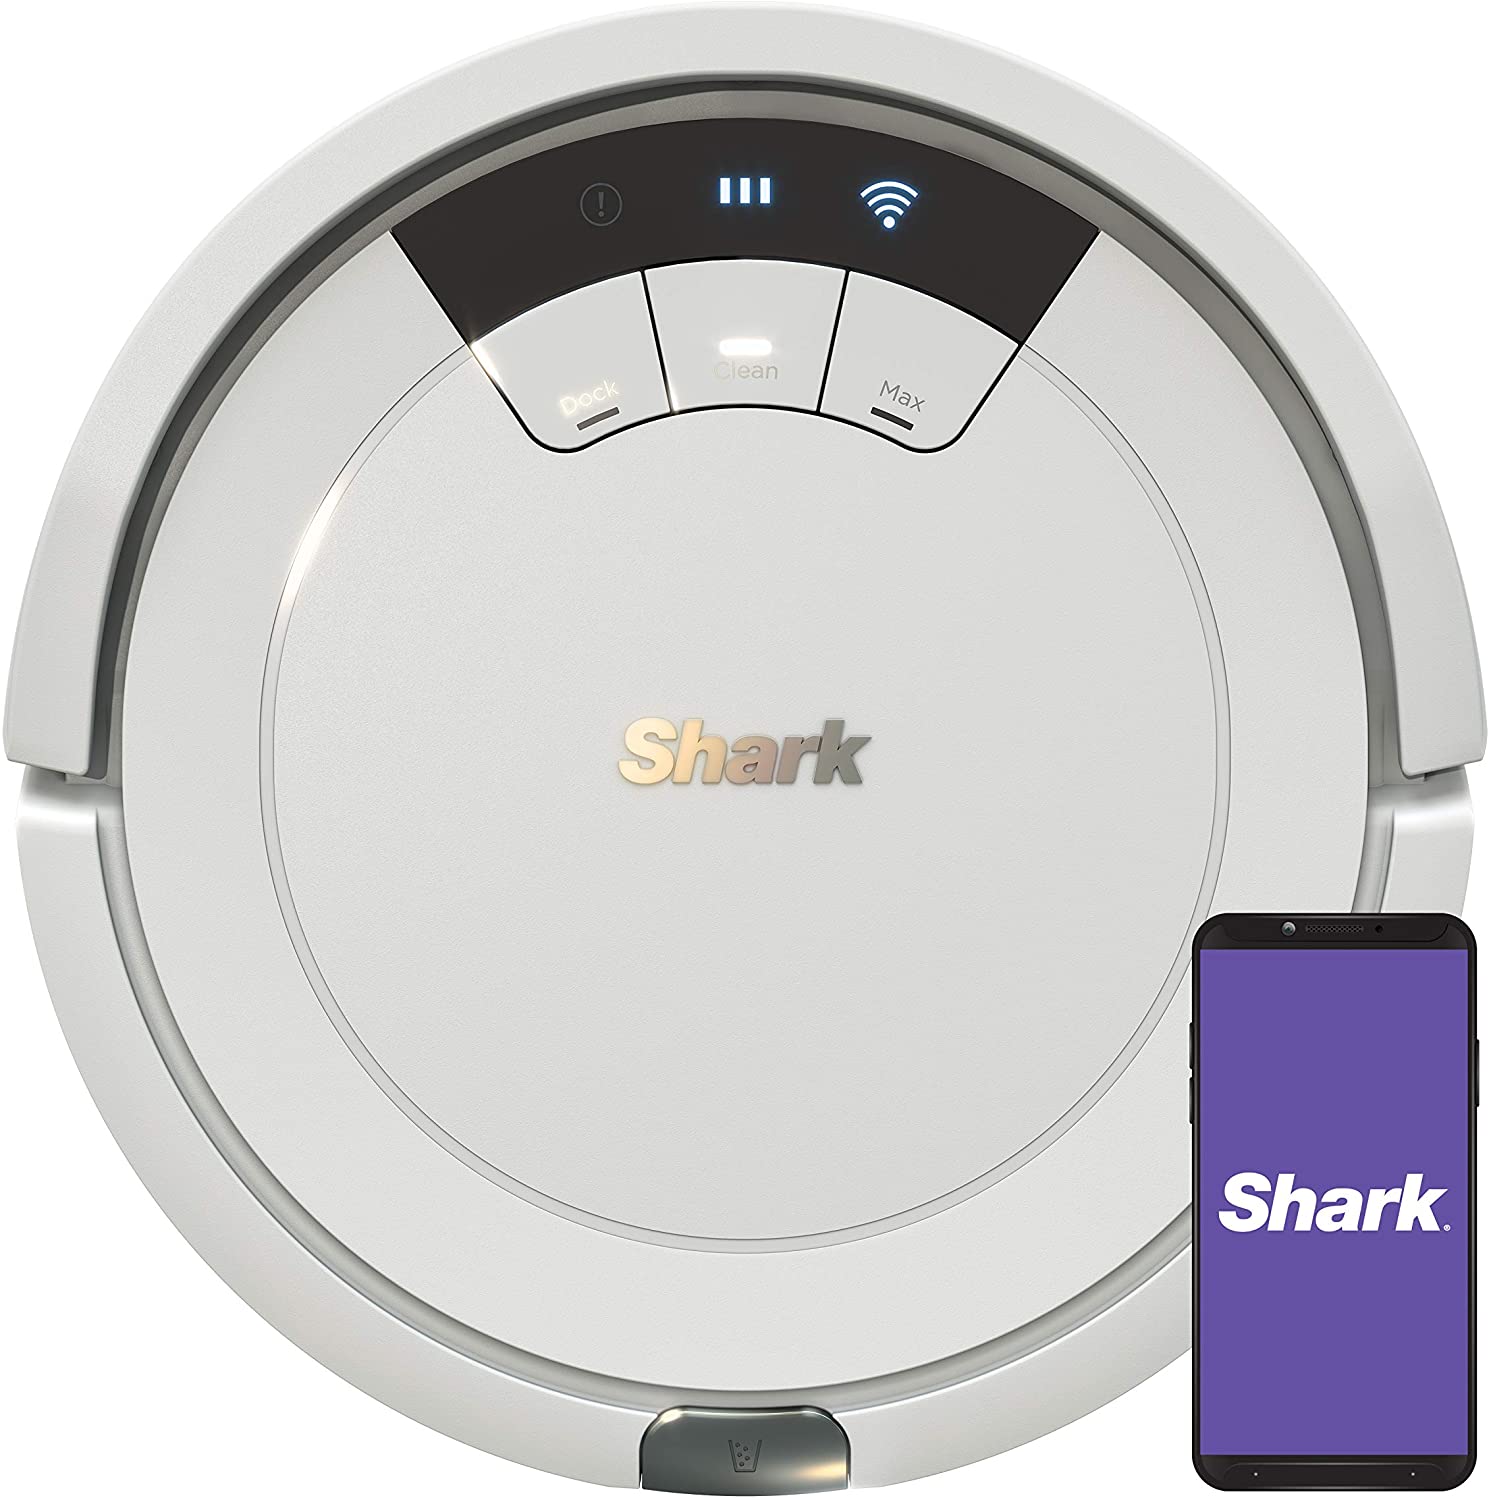 Shark Vacuums On Sale On Amazon! Early Prime Day Deal!